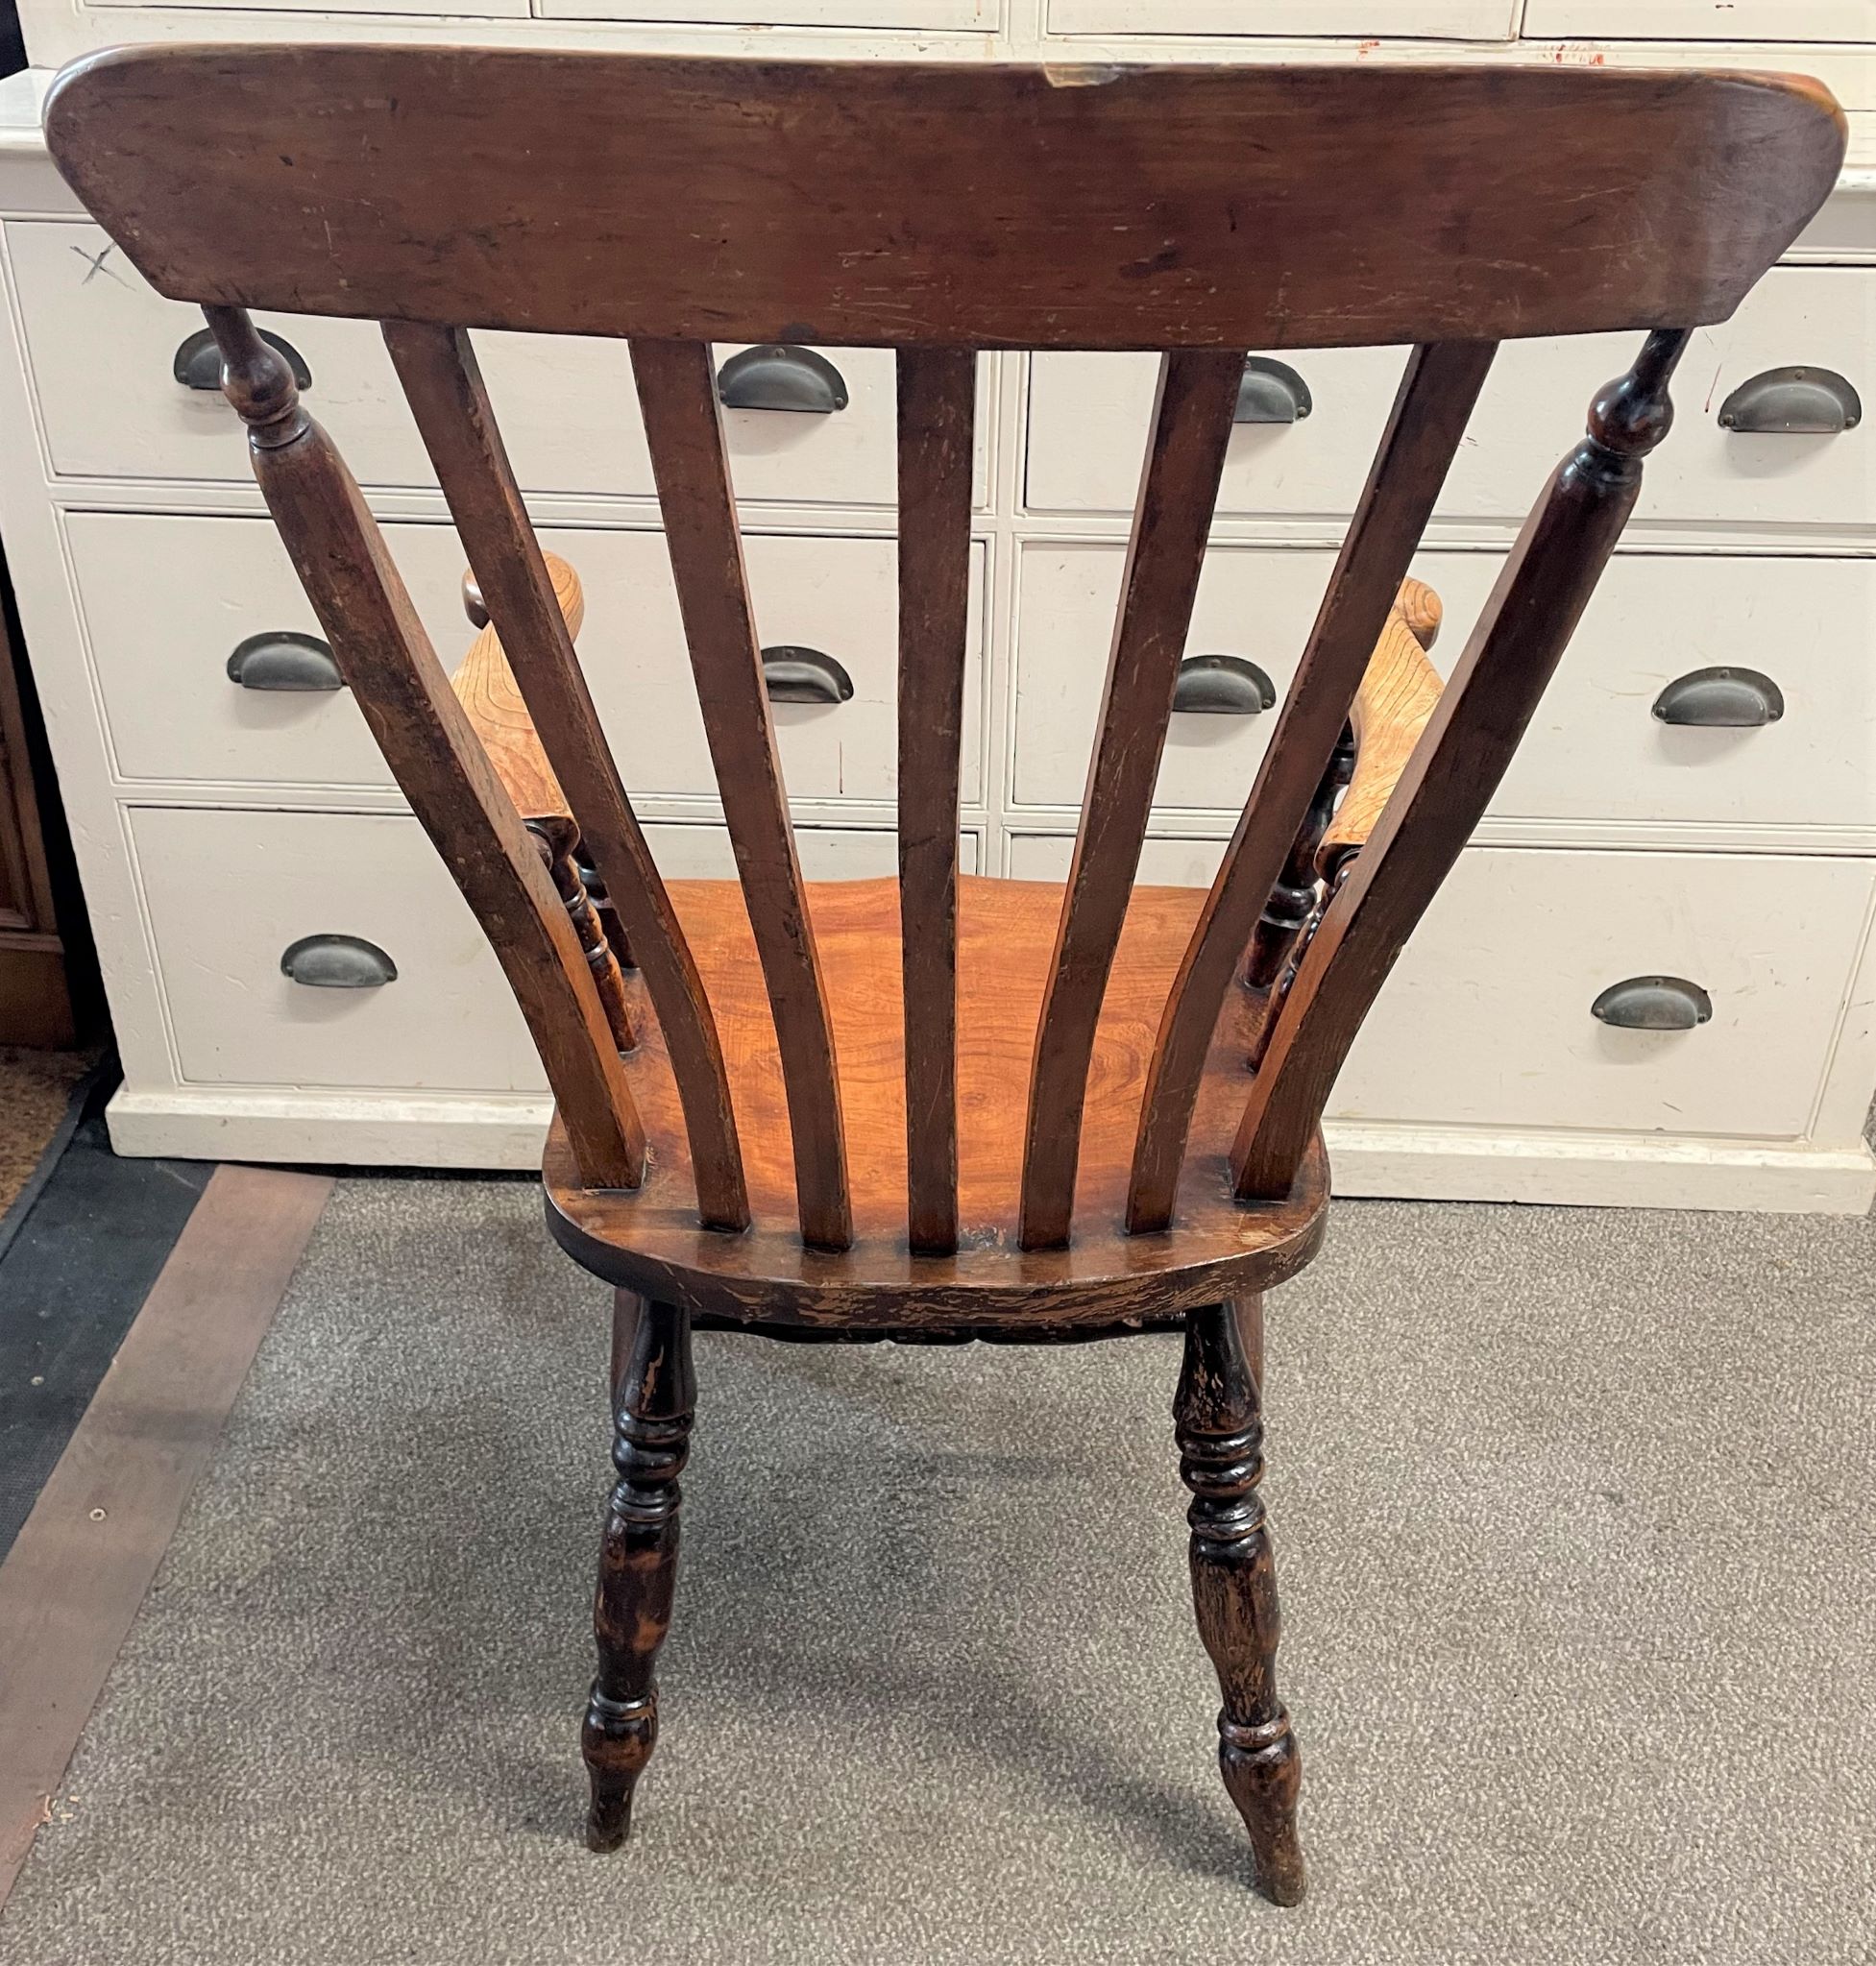 Victorian farmhouse kitchen chair - Image 2 of 2